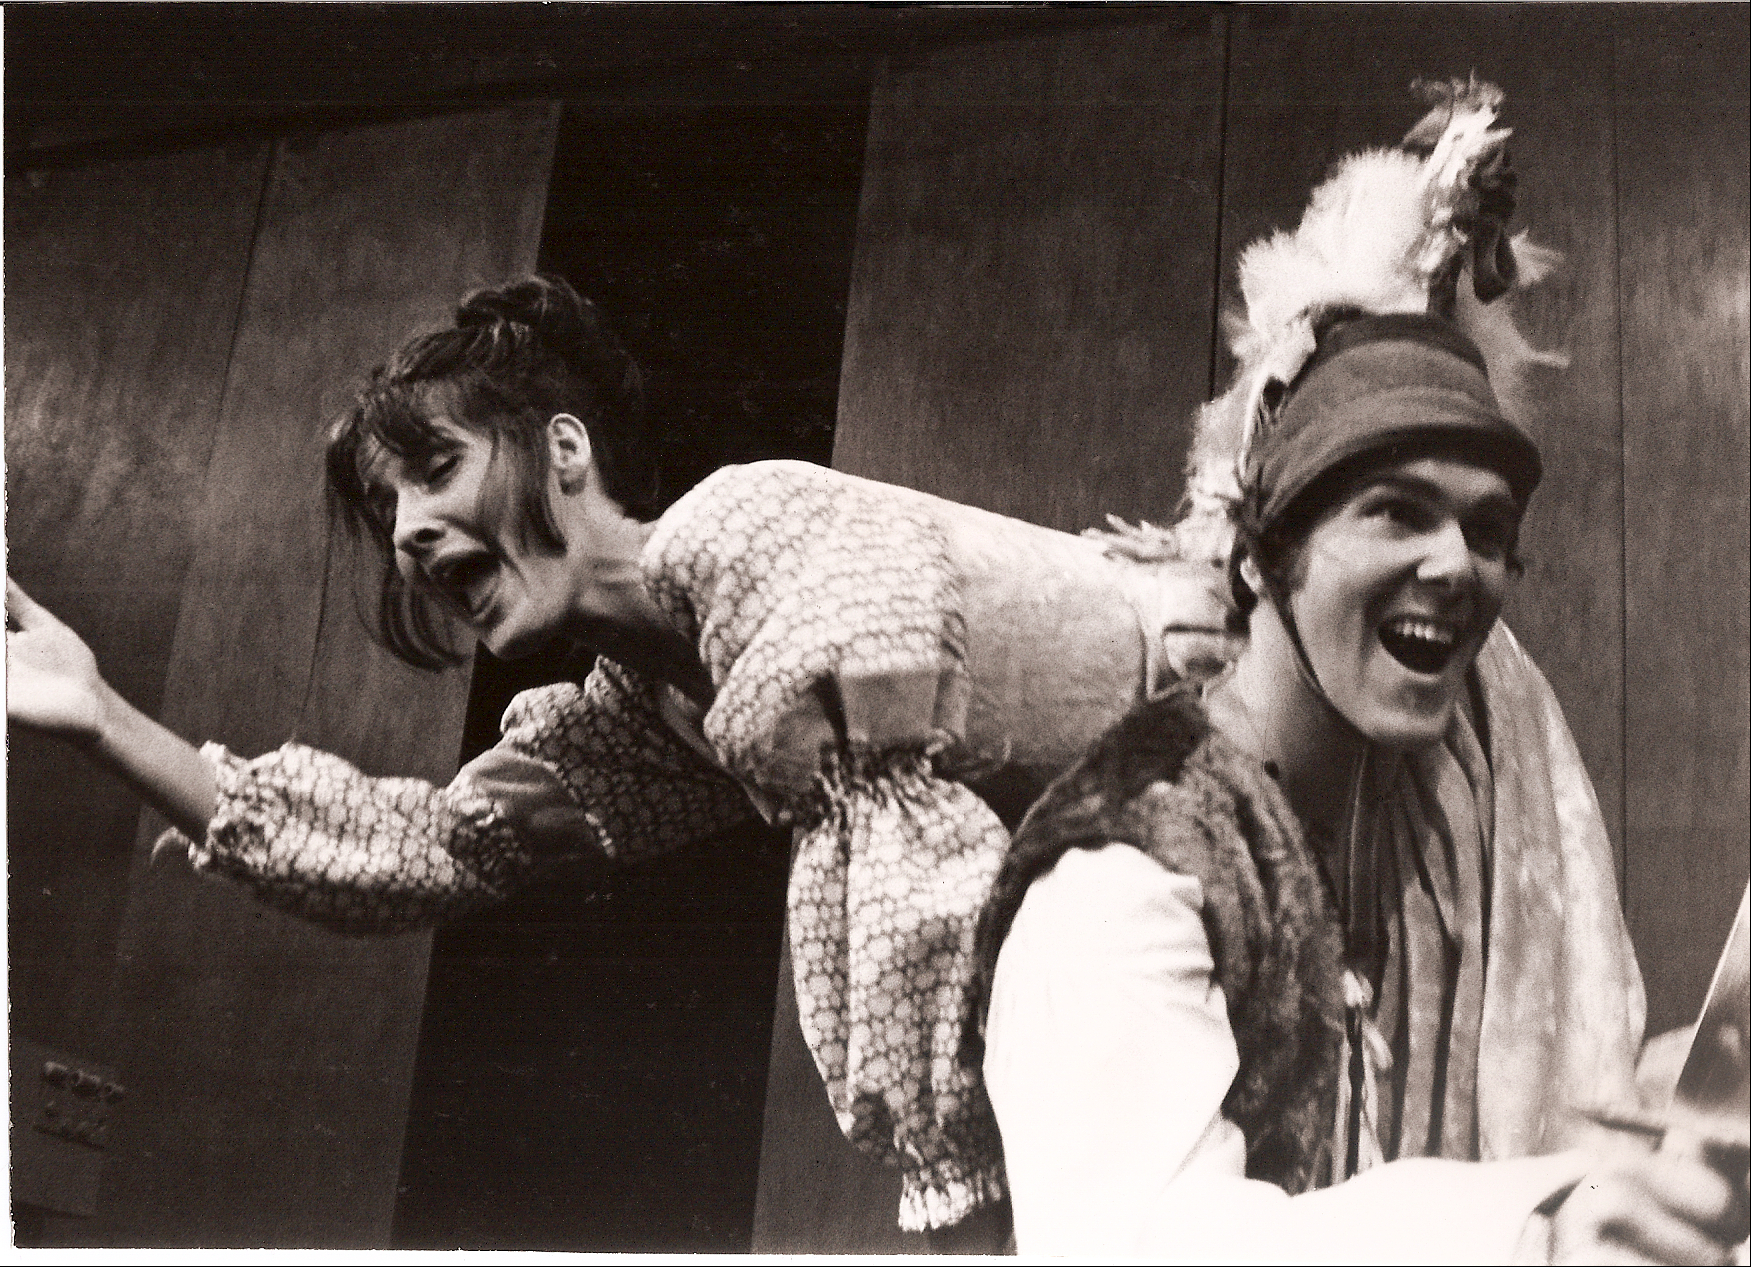 Petruchio in THE TAMING OF THE SHREW with Jane Herrick